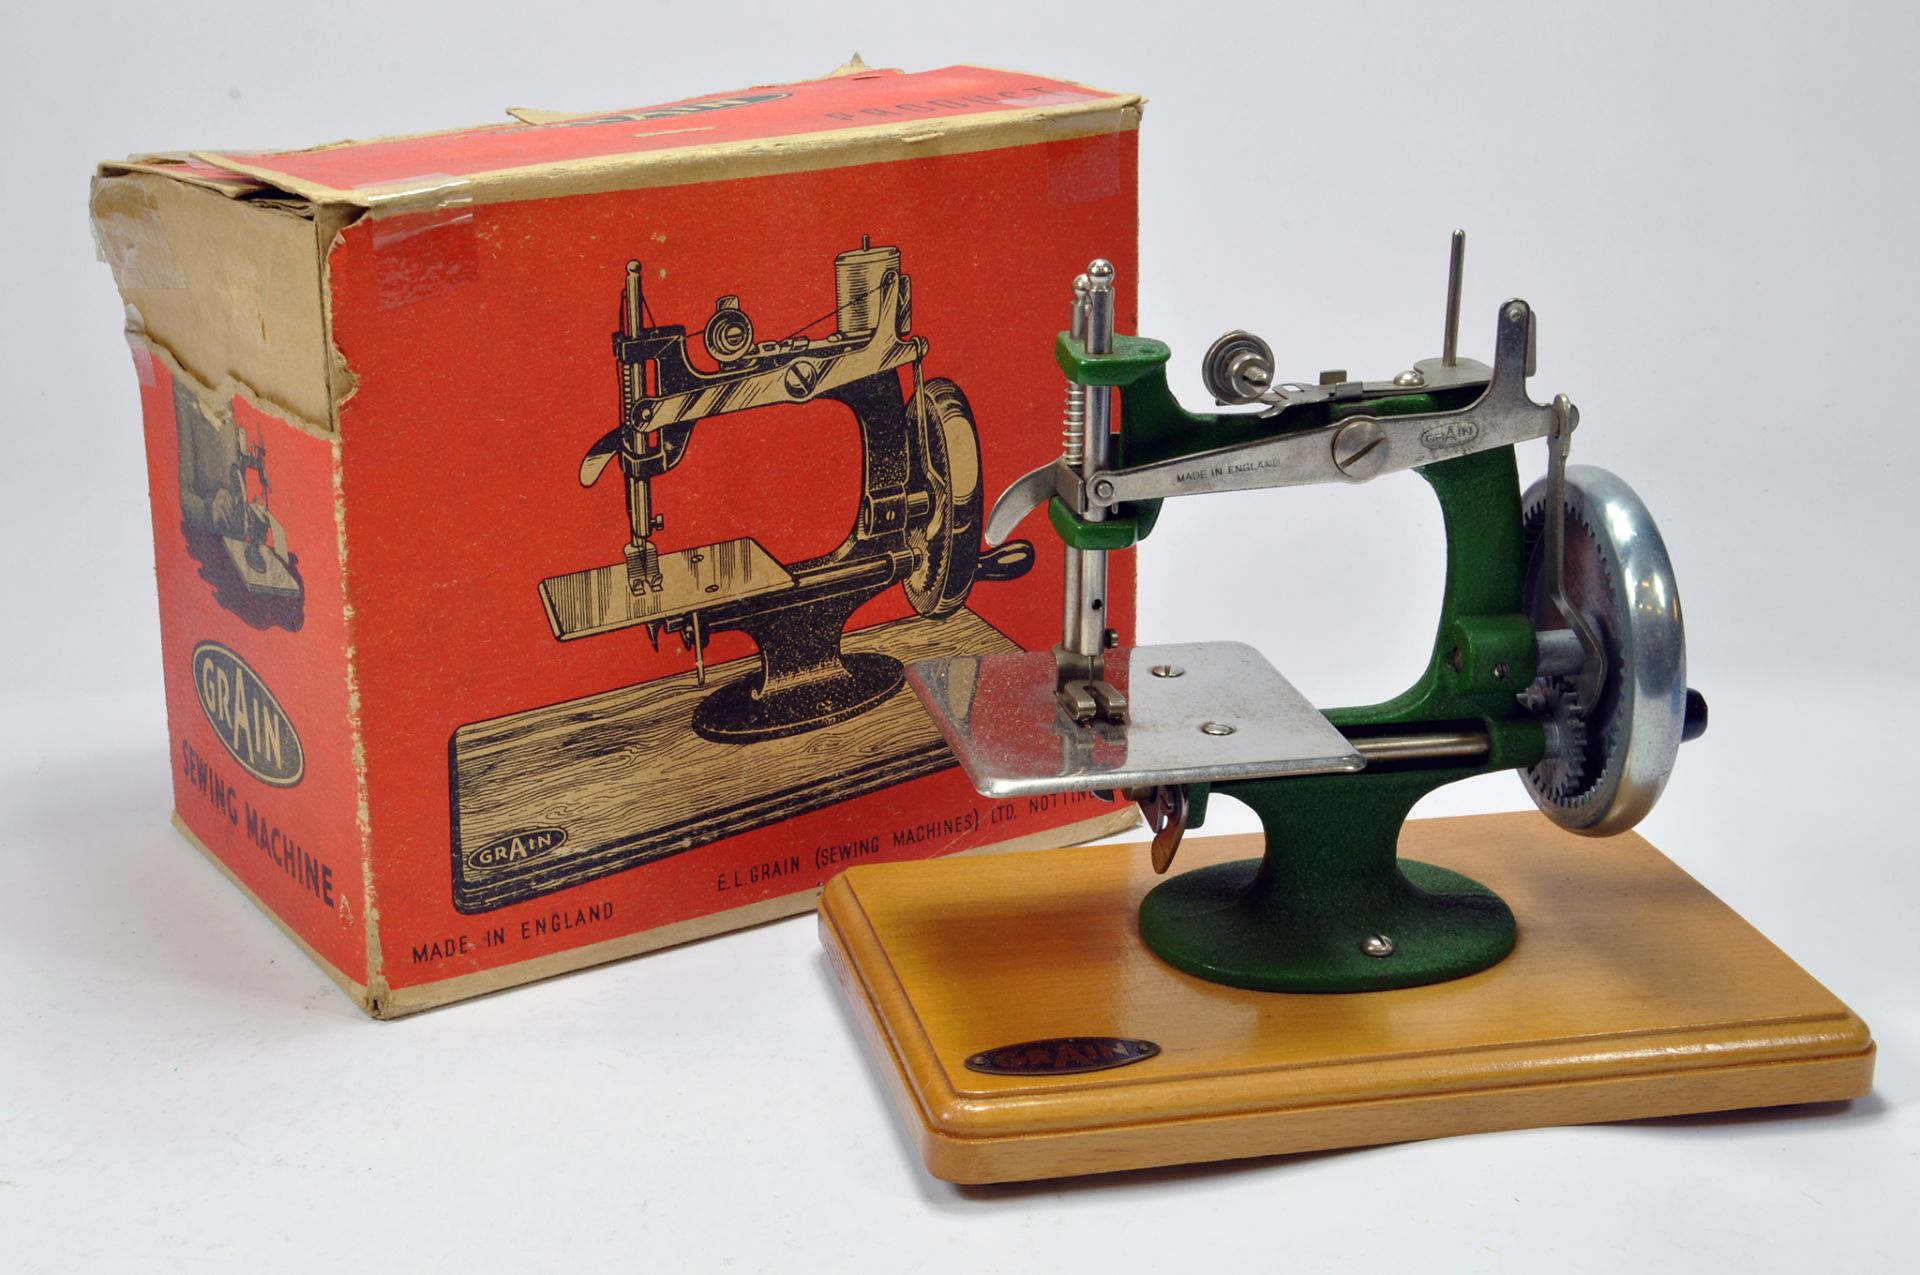 A Grain Metal Made Toy Sewing Machine. This well preserved issue appears complete and comes with